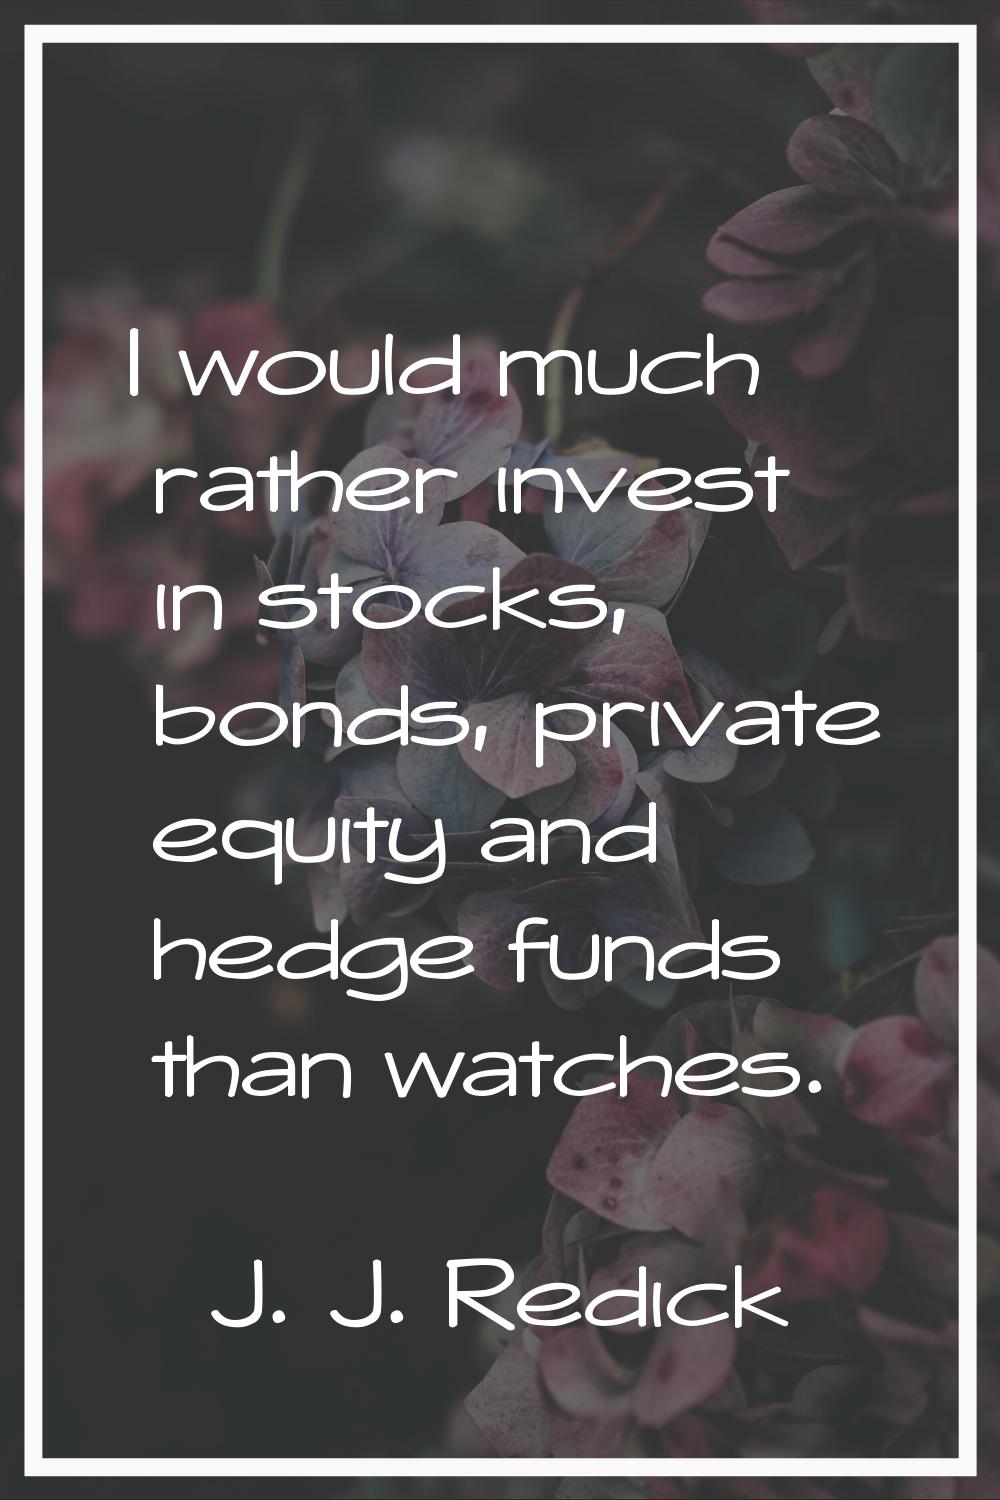 I would much rather invest in stocks, bonds, private equity and hedge funds than watches.